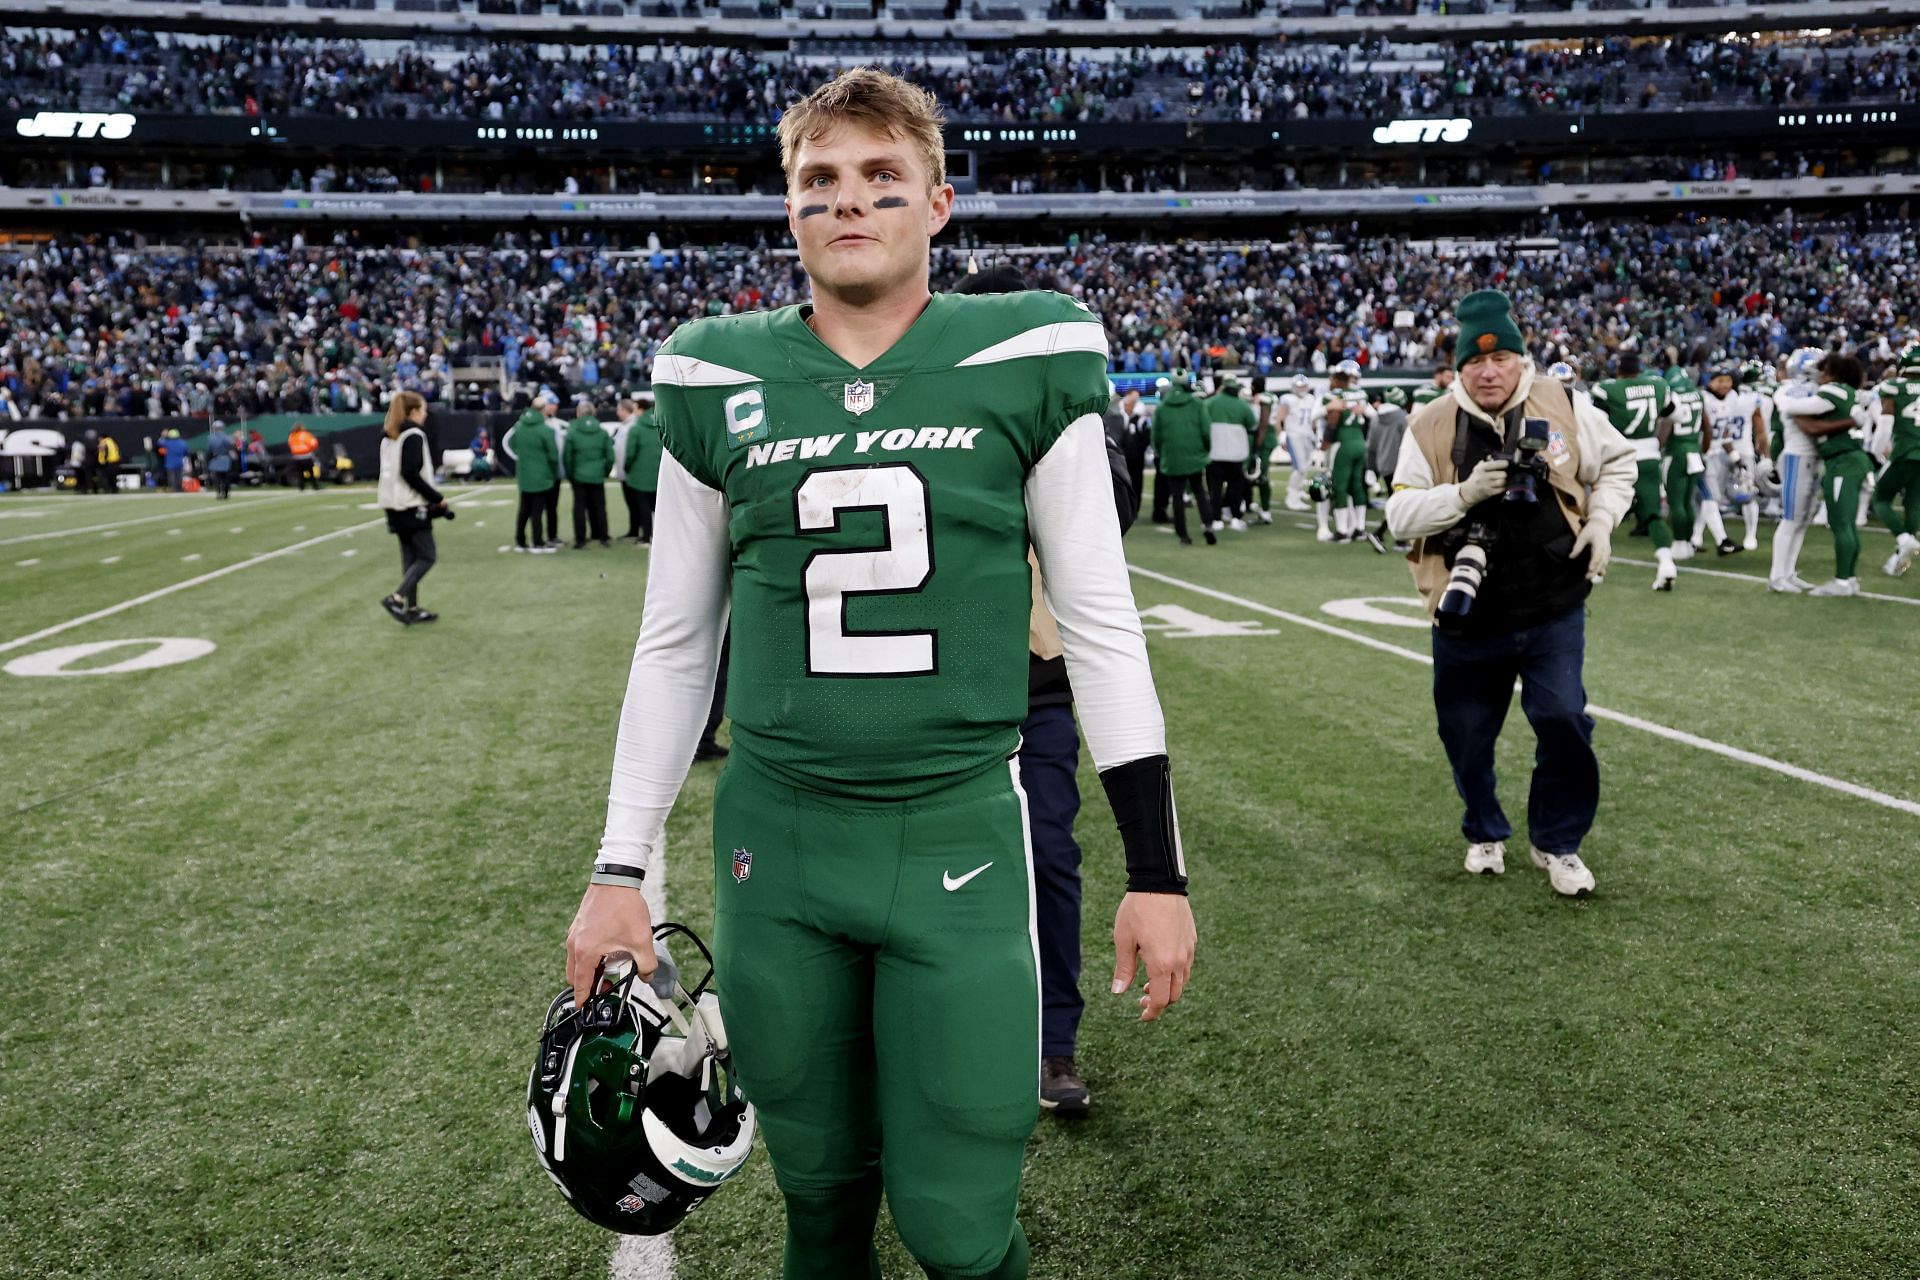 Will the Jets get a rookie quarterback?